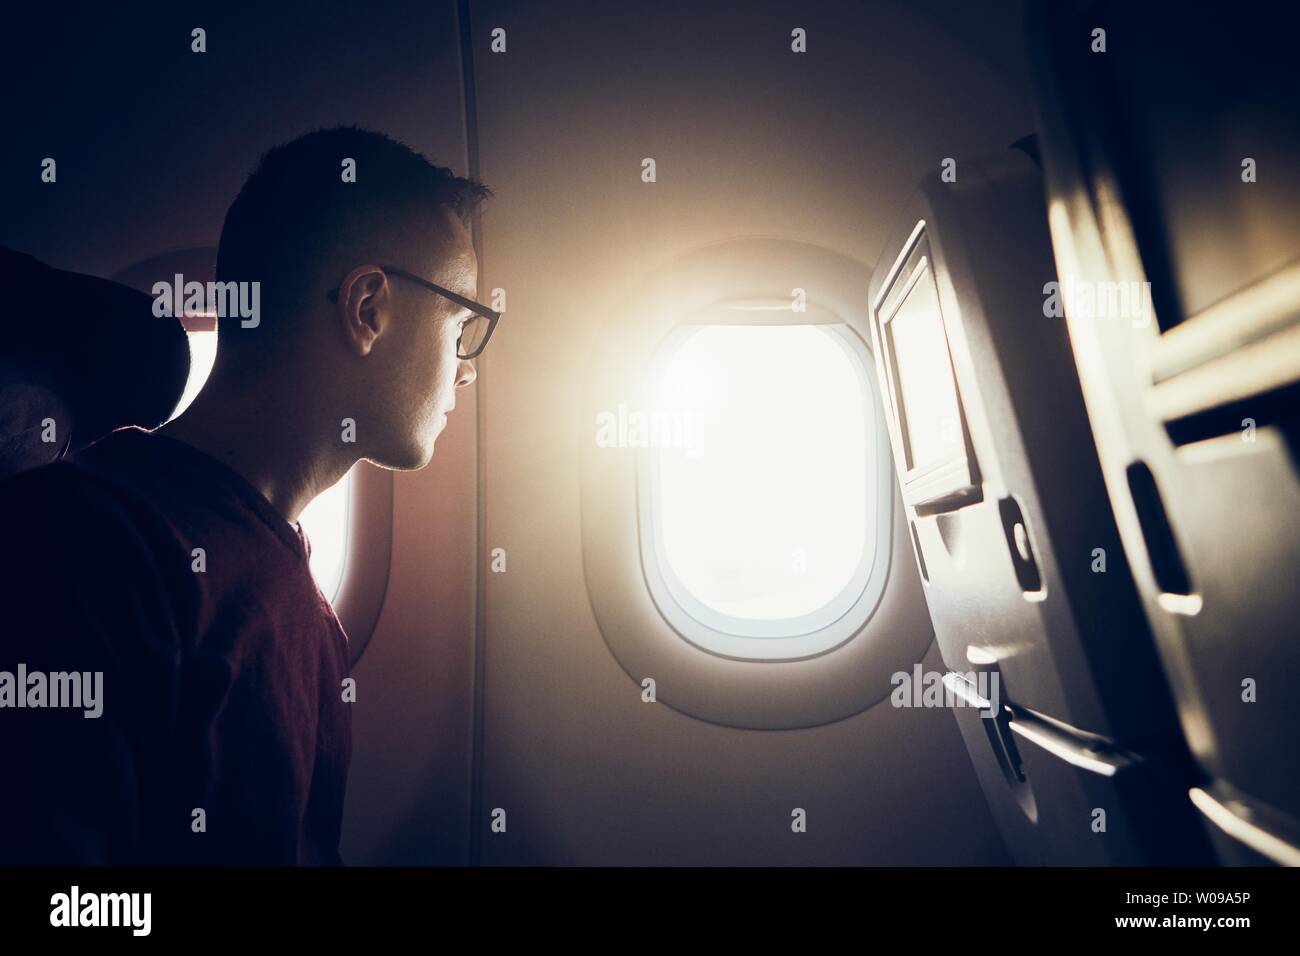 Man traveling by airplane. Pensive passenger looking through window during flight at sunset. Stock Photo